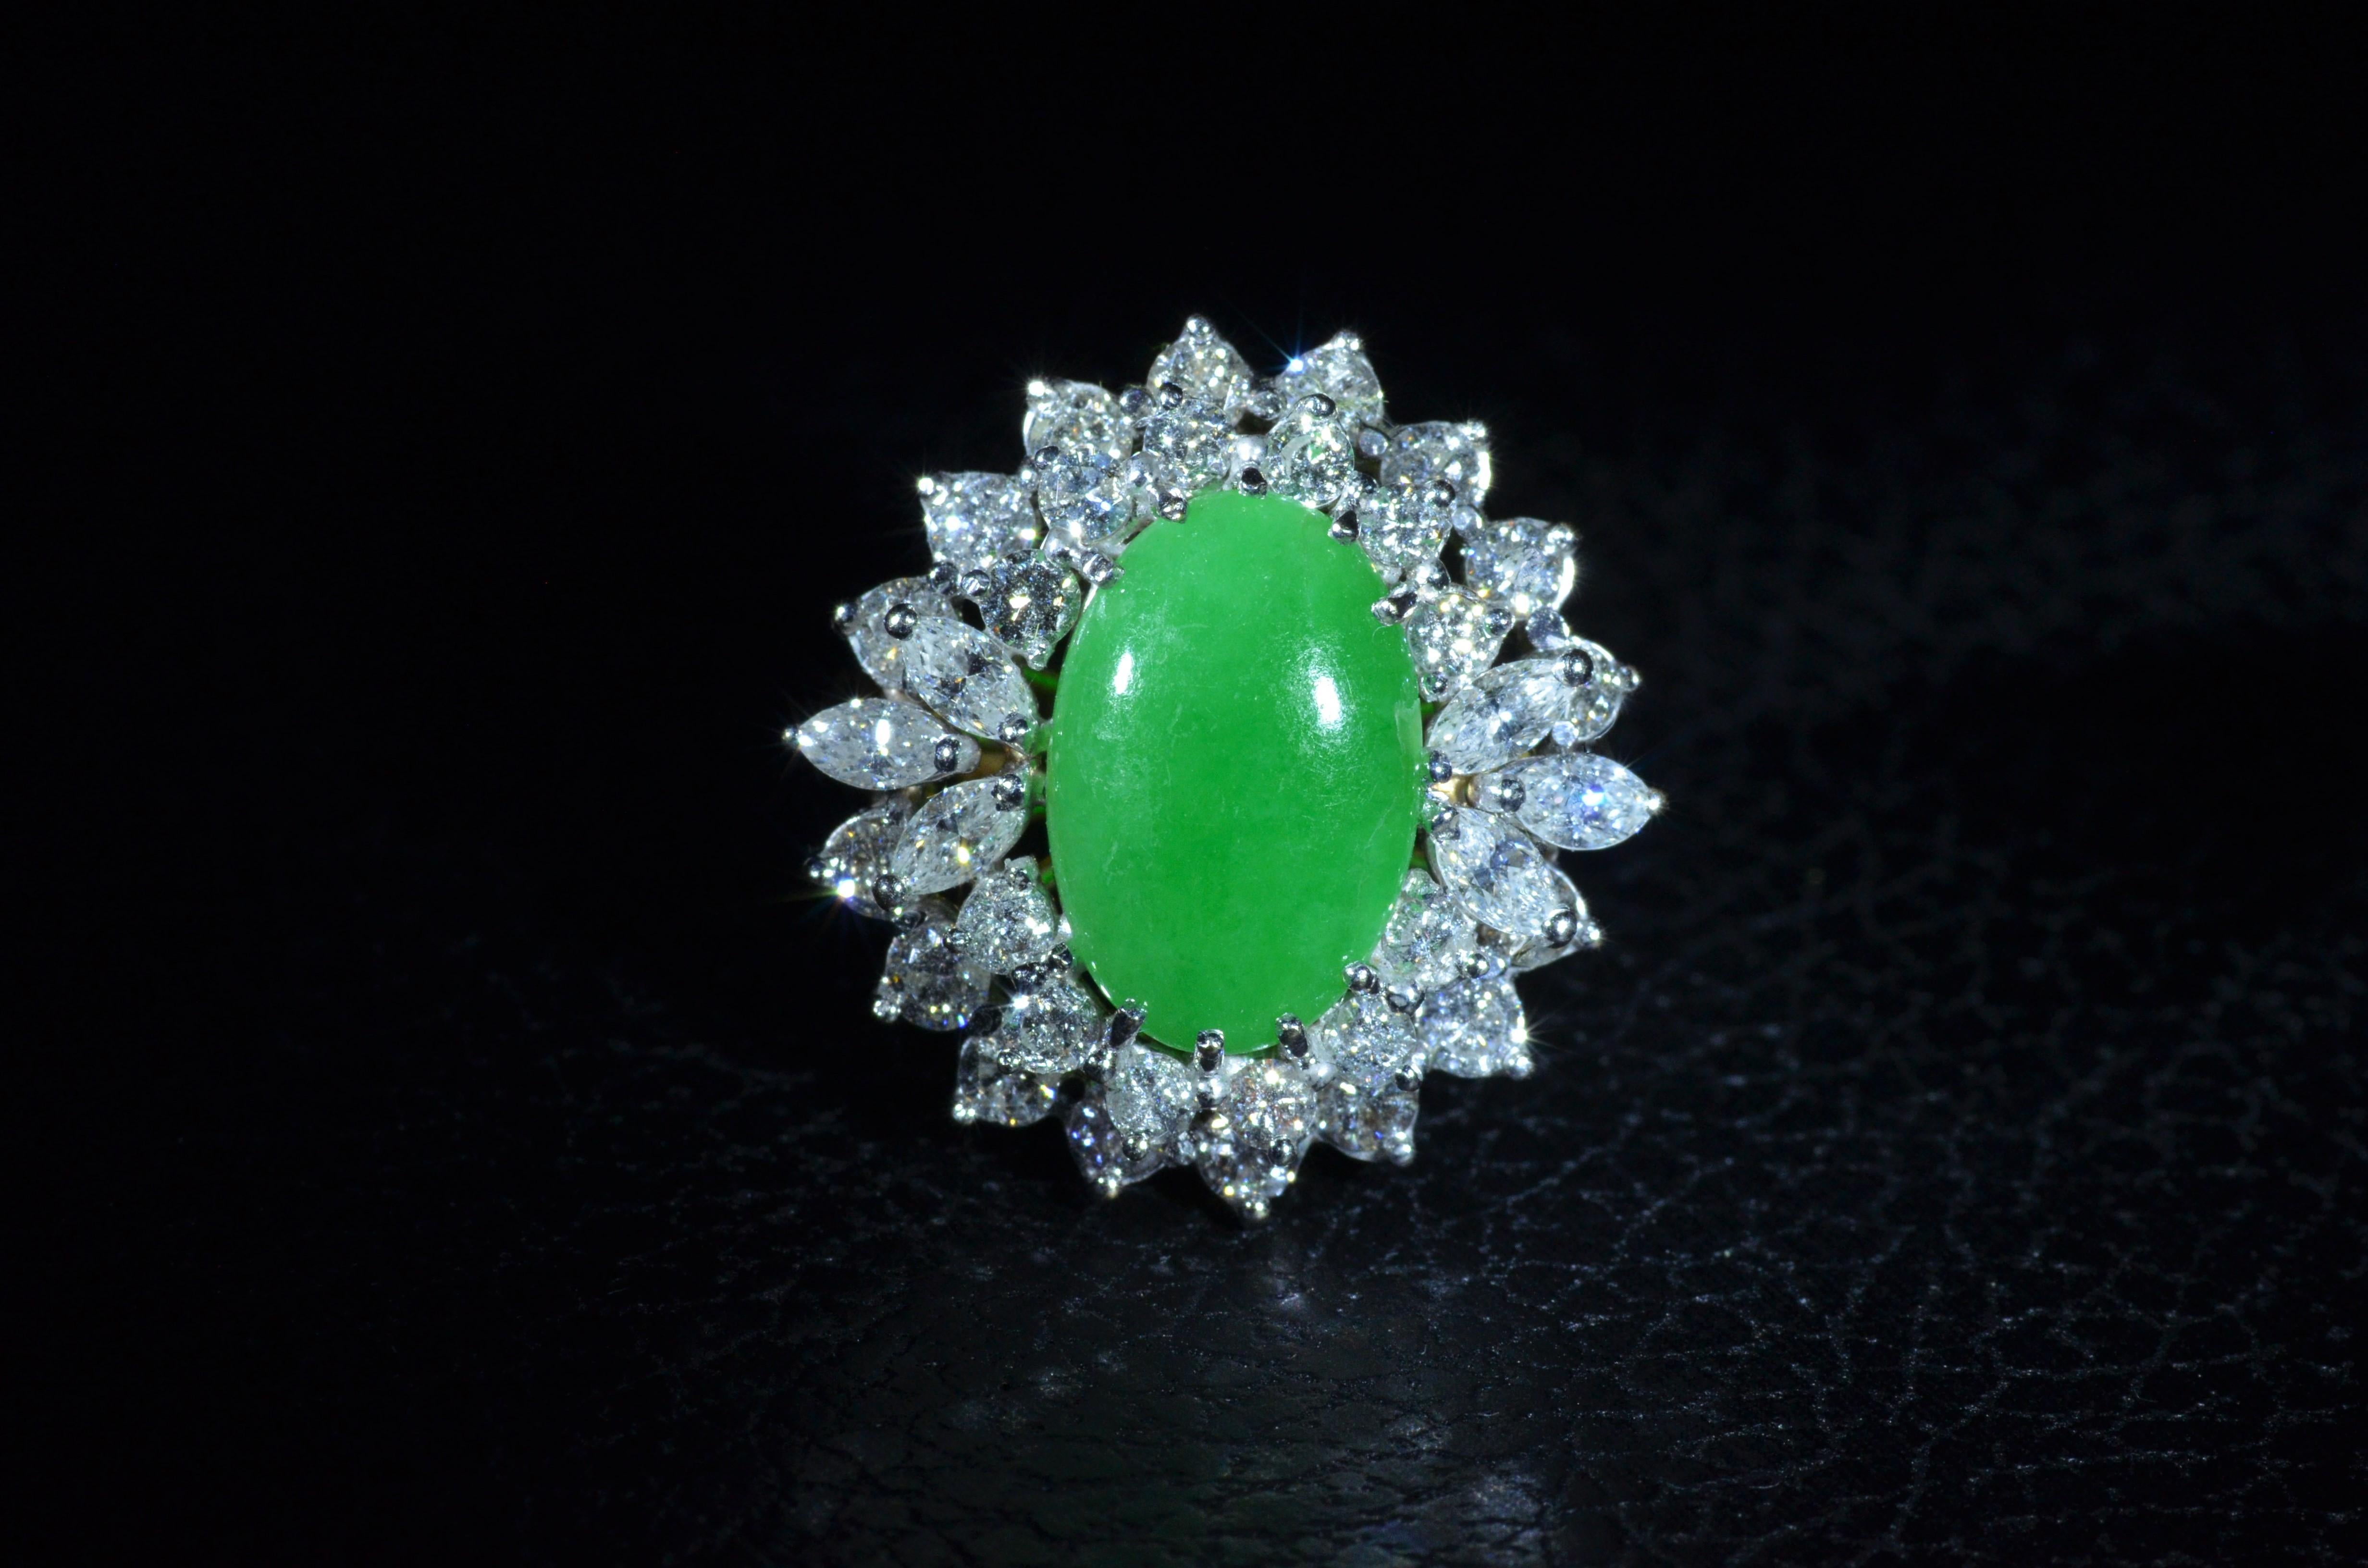 Ladies 18 Karat yellow gold and white gold ring set with a Gemological Institute of America Graded Natural Jadeite Jade.  The jade is oval and cabochon in shape with a medium Green vivid in saturation and translucent by natural. Surrounding the